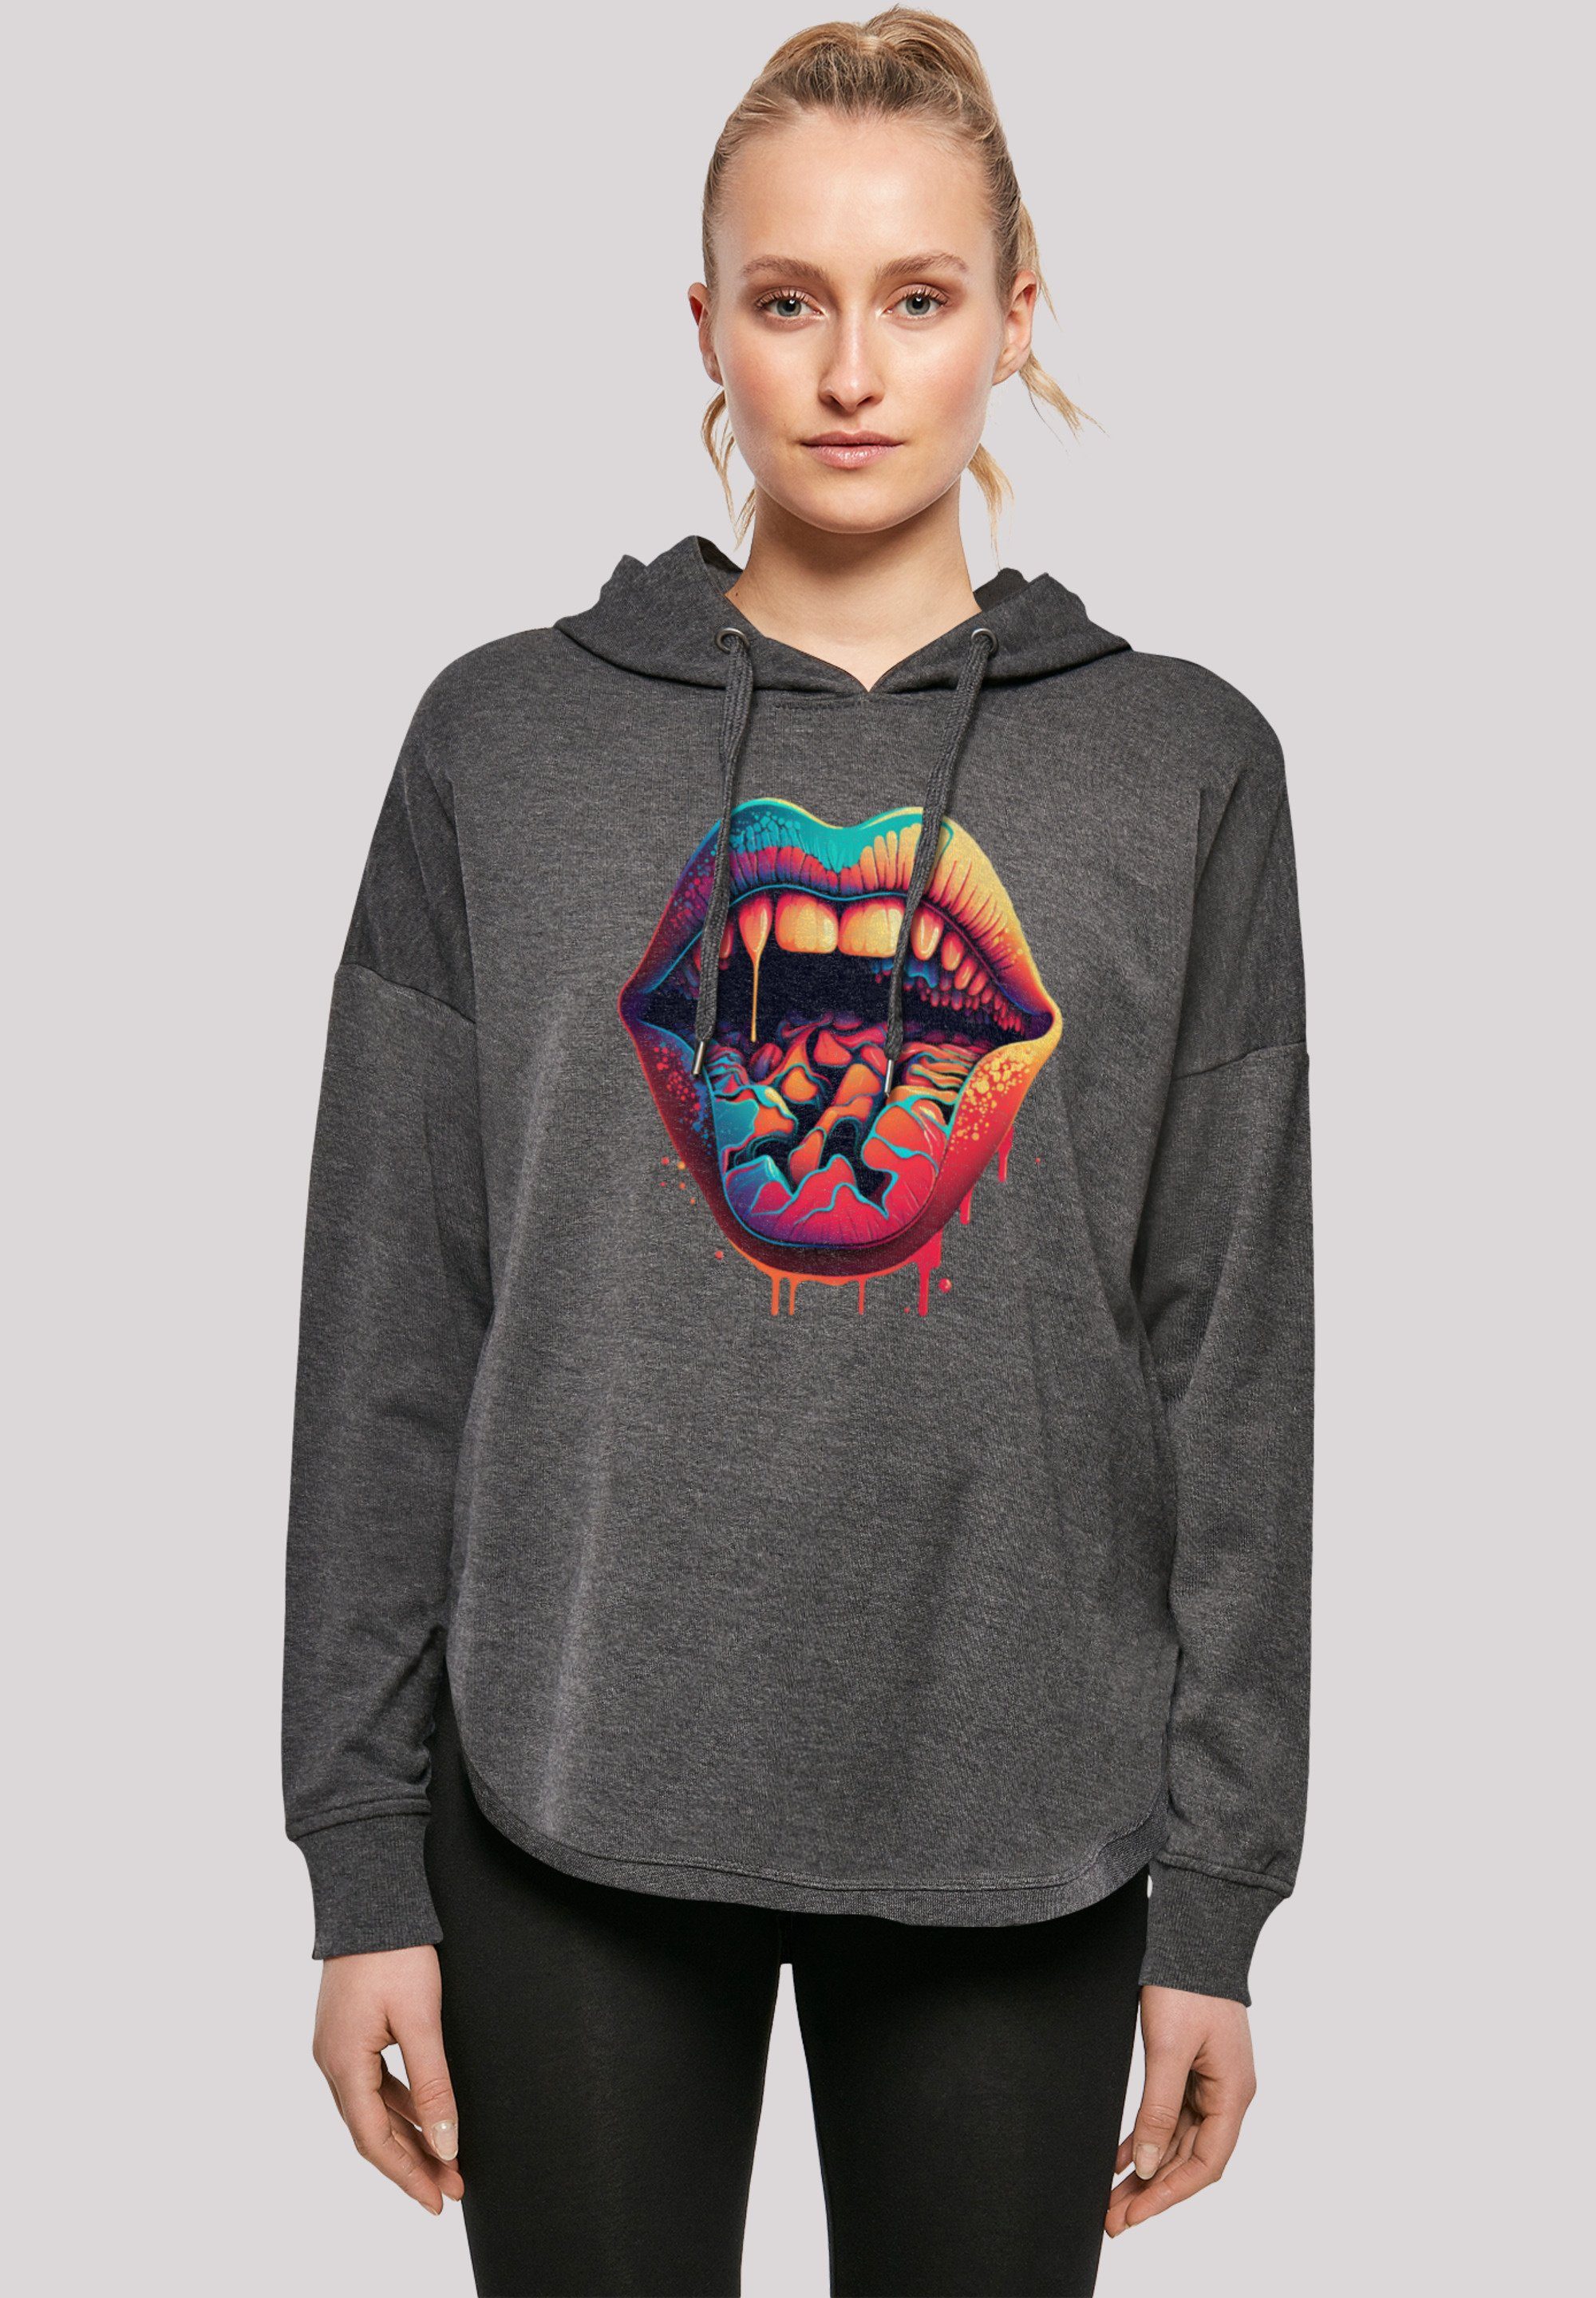 Lips OVERSIZE charcoal Kapuzenpullover Drooling F4NT4STIC Print HOODIE